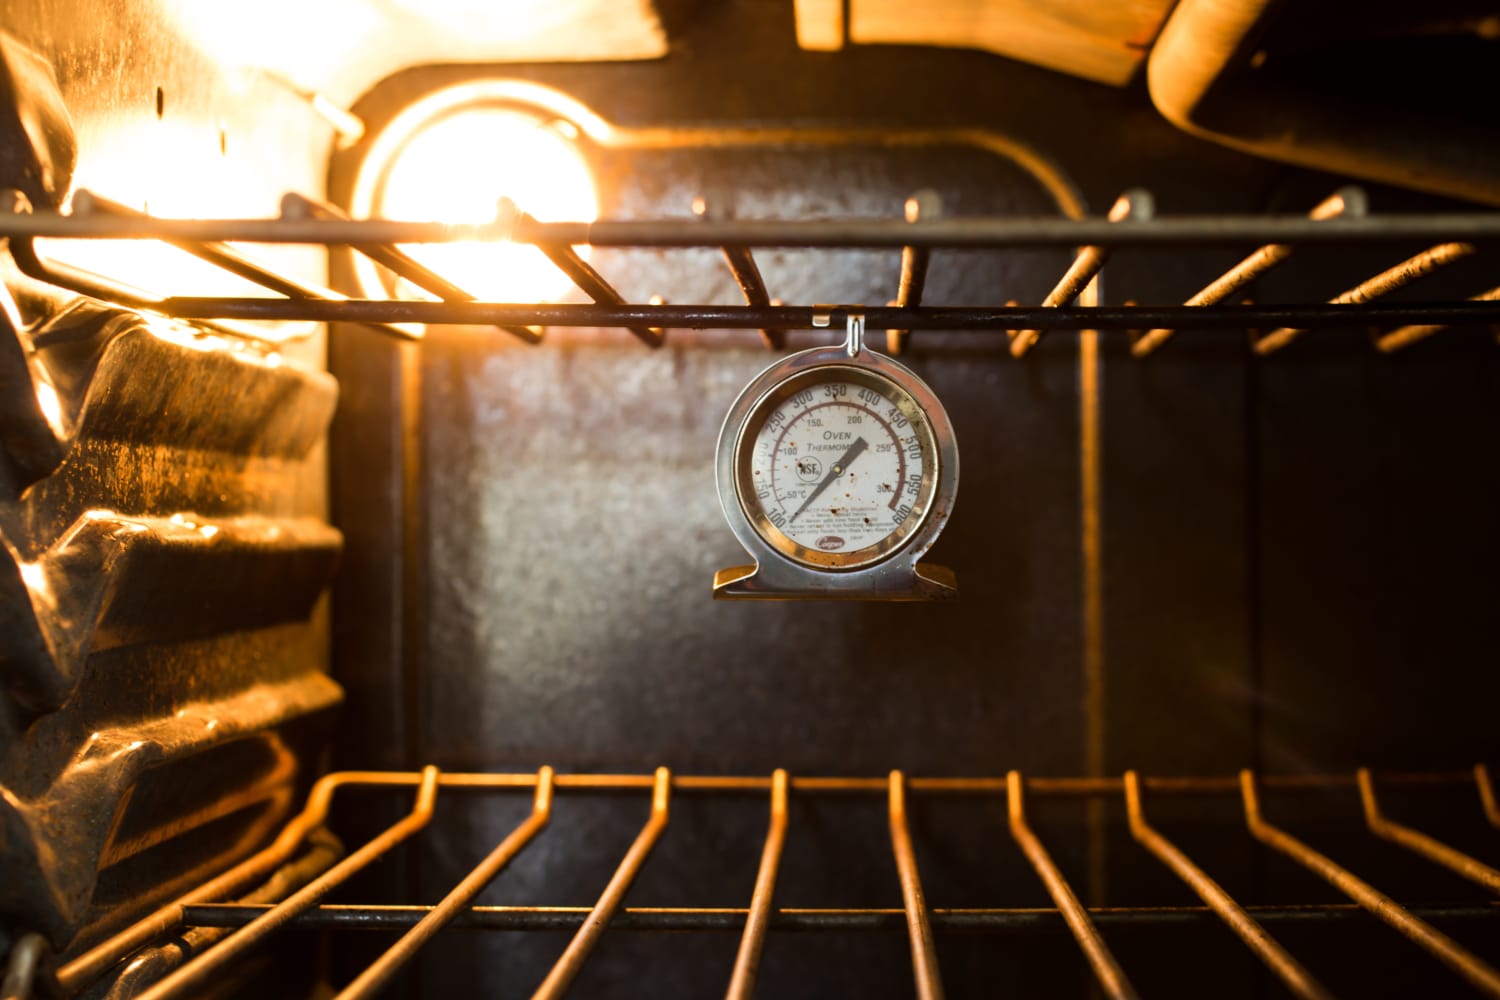 Use an oven thermometer - kitchen tip 1 